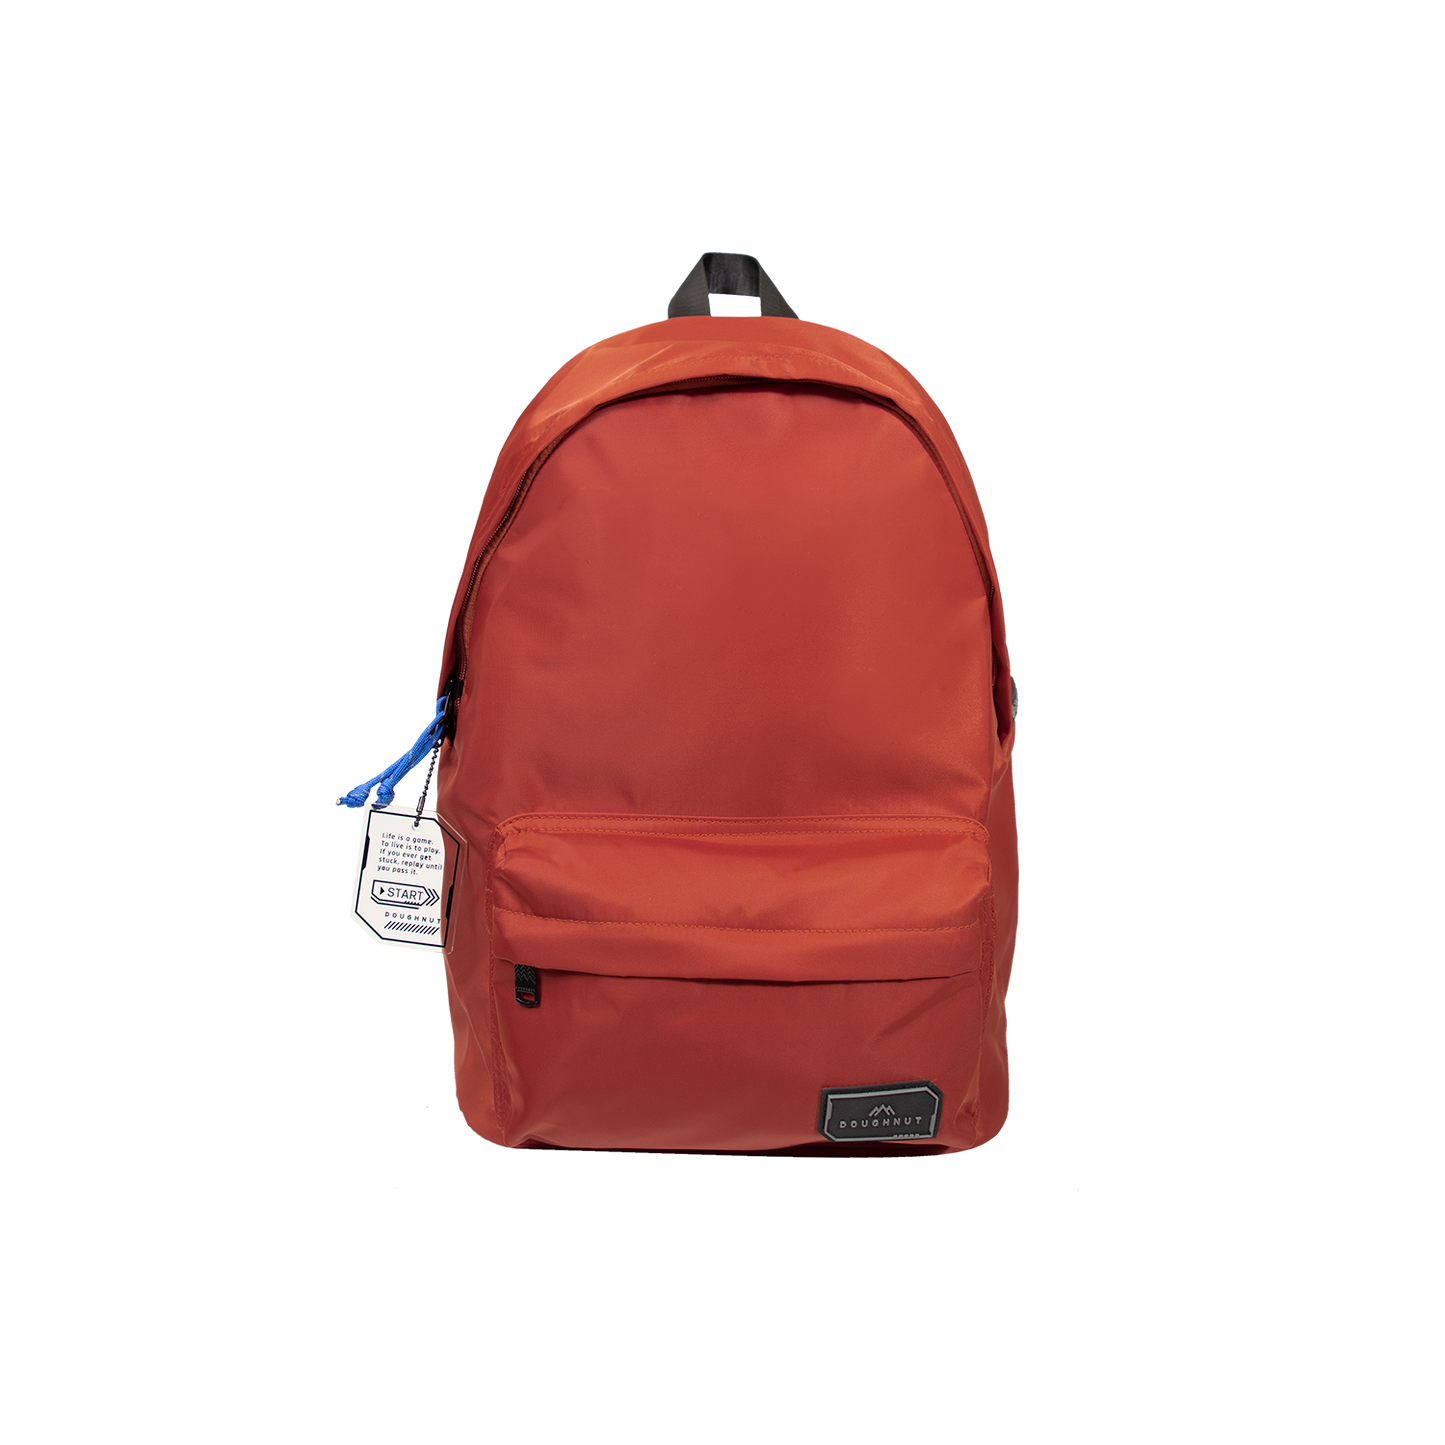 Plus One Gamescape Series Backpack